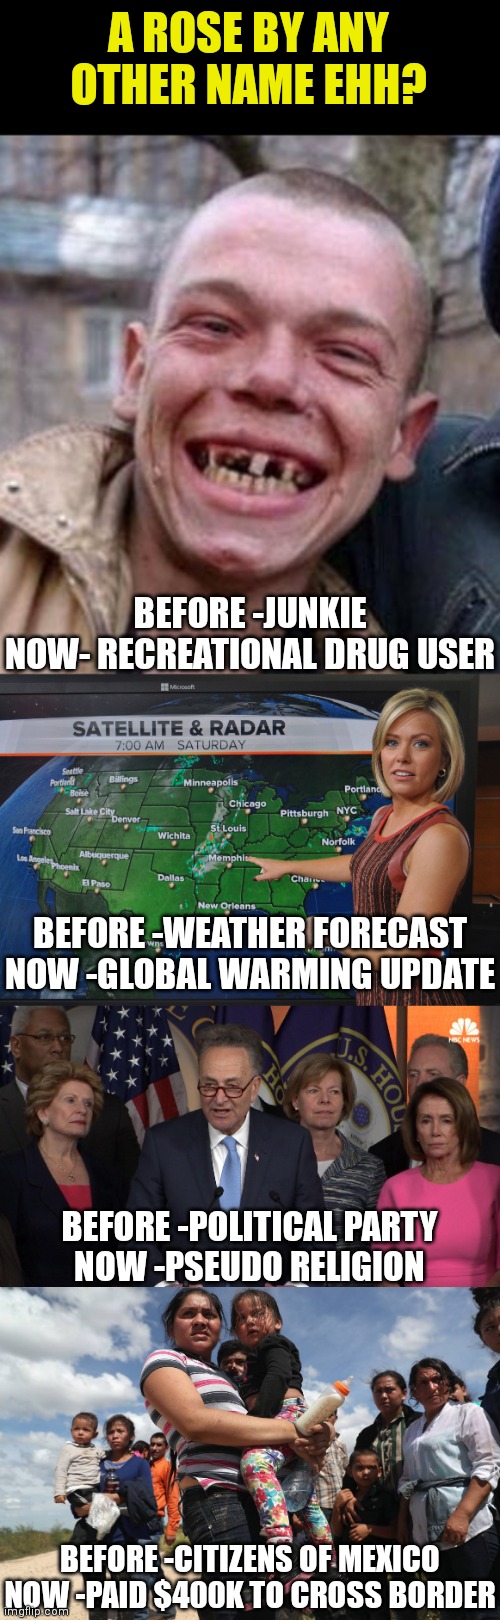 How things change.......often for the worse too! | A ROSE BY ANY OTHER NAME EHH? BEFORE -JUNKIE
NOW- RECREATIONAL DRUG USER; BEFORE -WEATHER FORECAST
NOW -GLOBAL WARMING UPDATE; BEFORE -POLITICAL PARTY
NOW -PSEUDO RELIGION; BEFORE -CITIZENS OF MEXICO
NOW -PAID $400K TO CROSS BORDER | image tagged in crack head,weather forecast,democrat congressmen,illegal alien welfare seekers,liberals,liberal hypocrisy | made w/ Imgflip meme maker